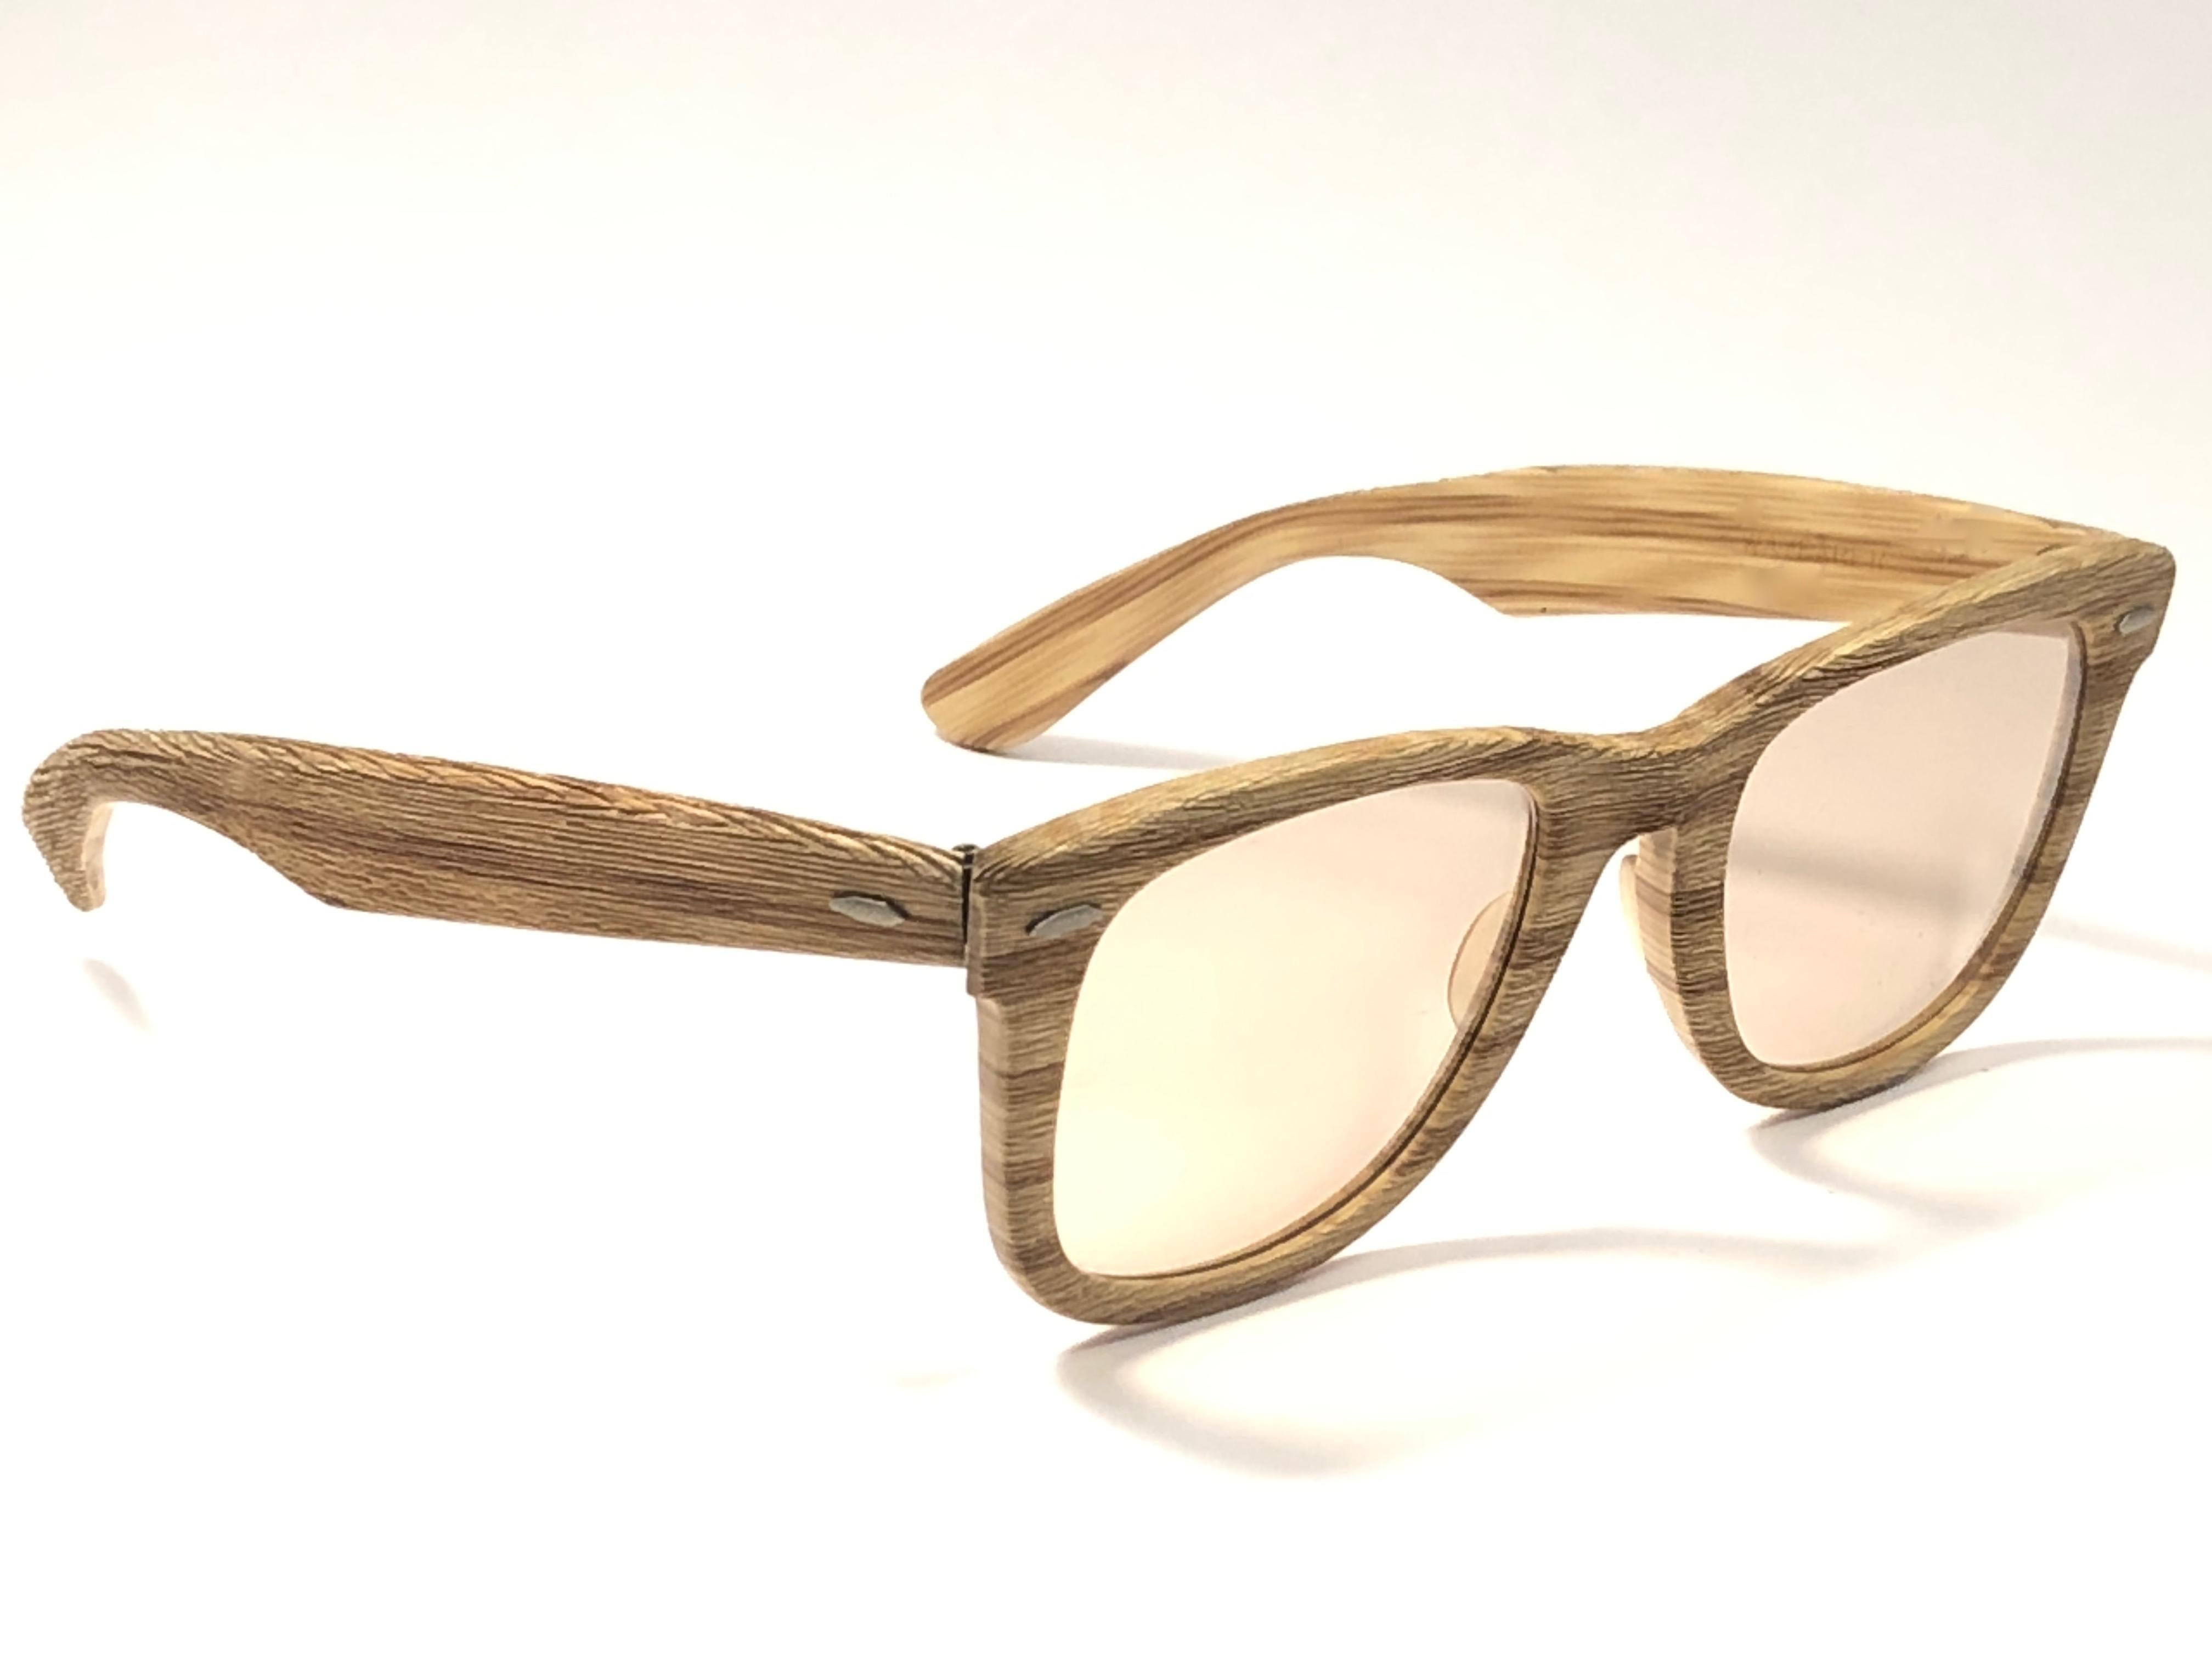 Black New Ray Ban The Wayfarer Woodies Driftwood Edition Collectors USA 80 Sunglasses For Sale